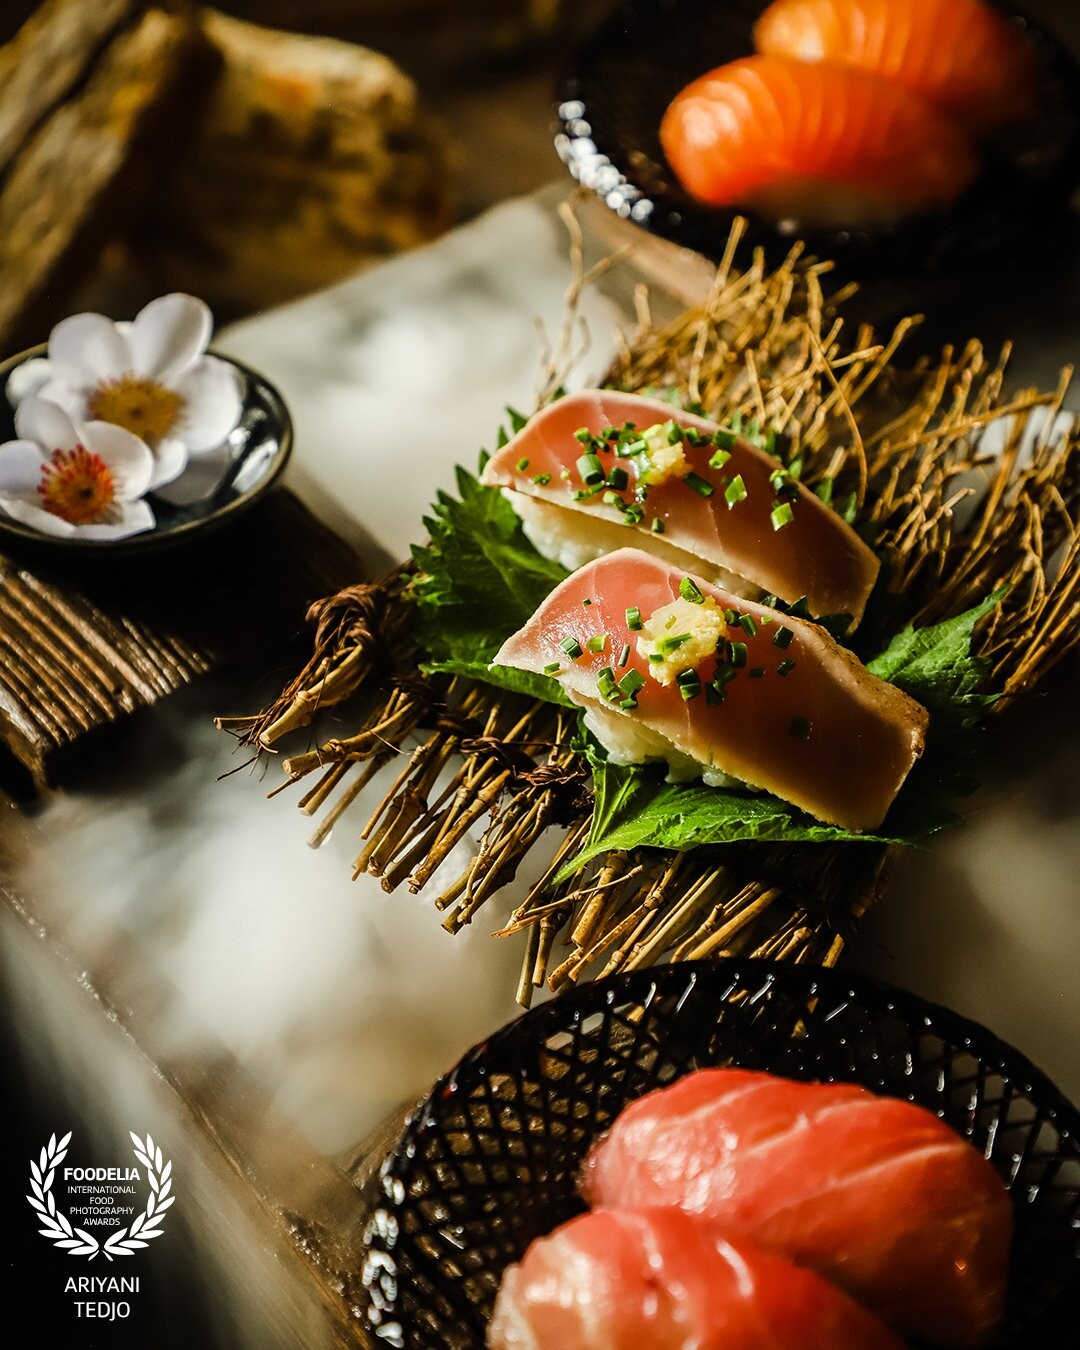 A nigiri sushi of lightly seared tuna. The sushi is placed on a mat of thin branches, lined with shiso leaves. The sushi is presented on wooden drawer set with smoke from dry ice.